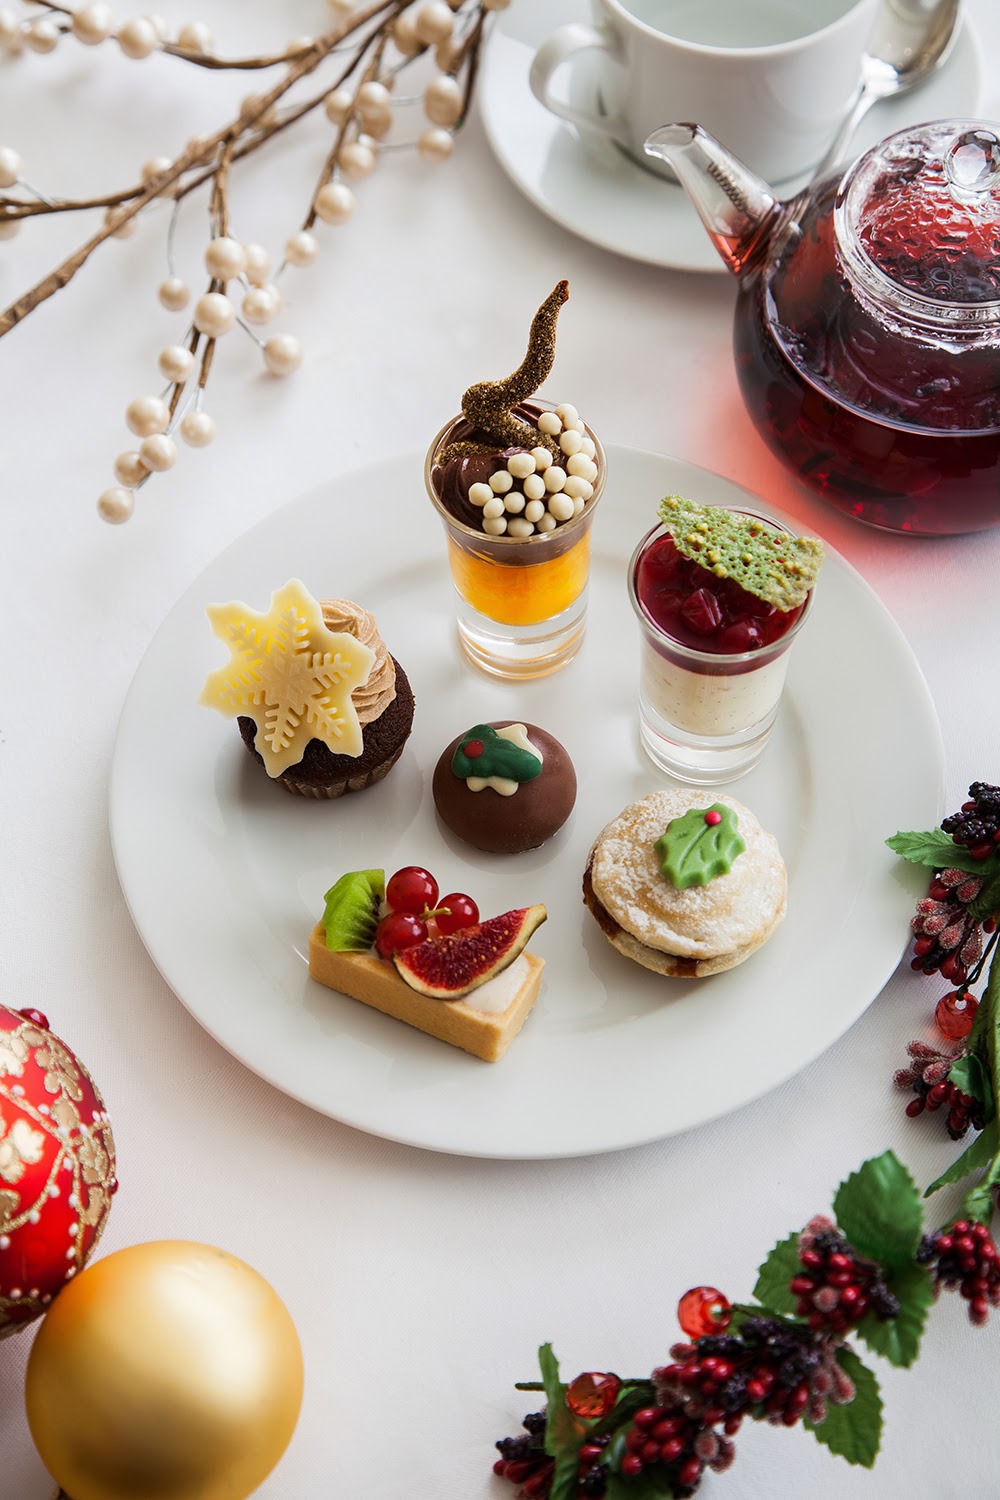 Kate and Chelsie: Decadent Christmas Afternoon Tea At The Capital Hotel